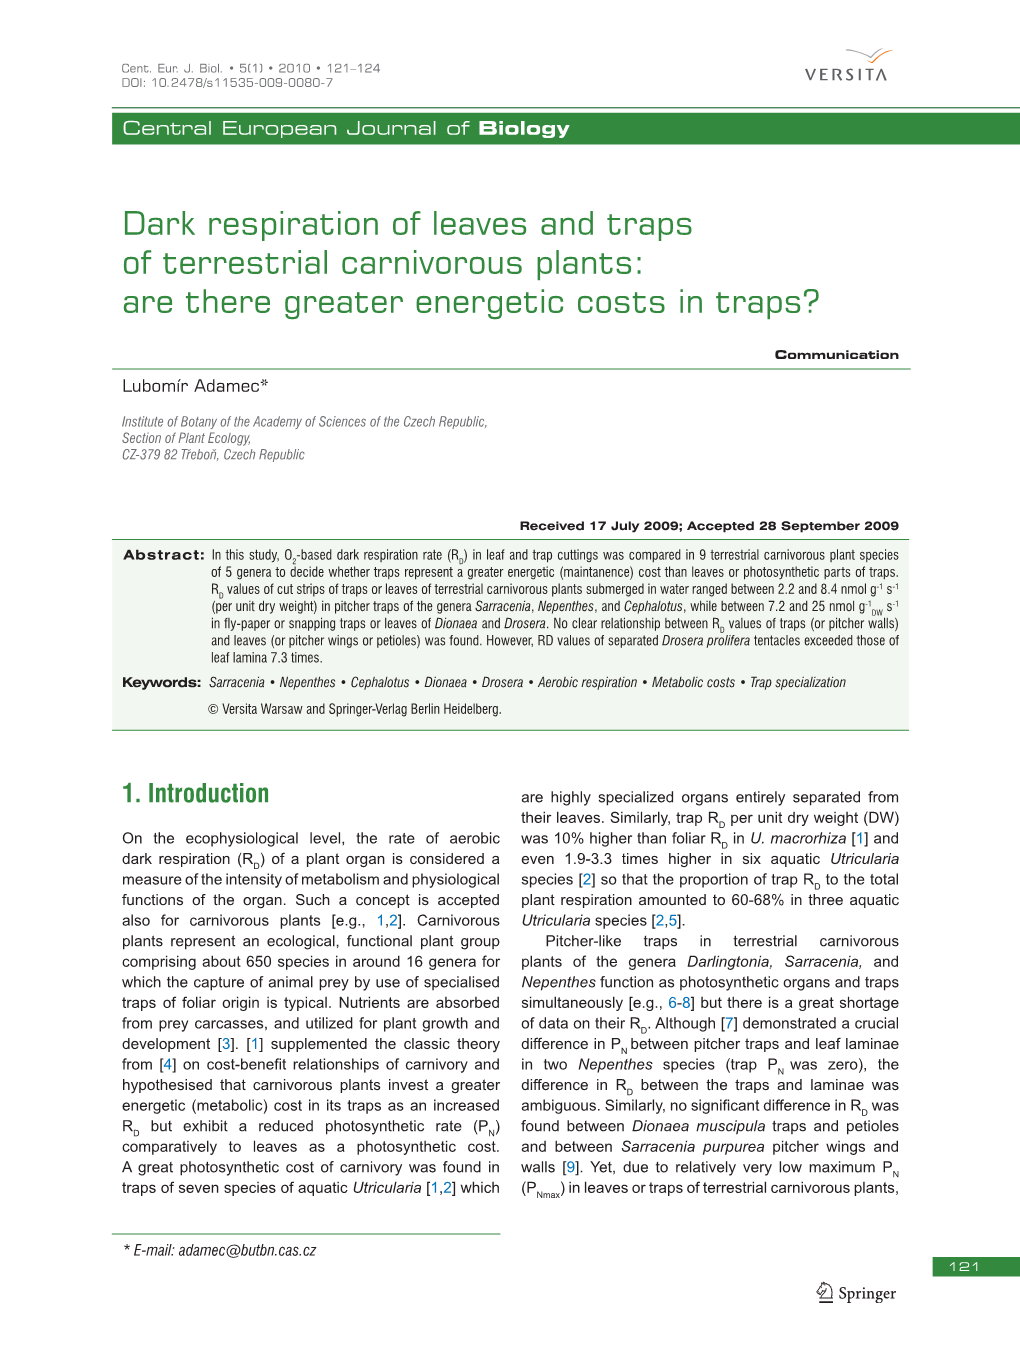 Dark Respiration of Leaves and Traps of Terrestrial Carnivorous Plants: Are There Greater Energetic Costs in Traps?